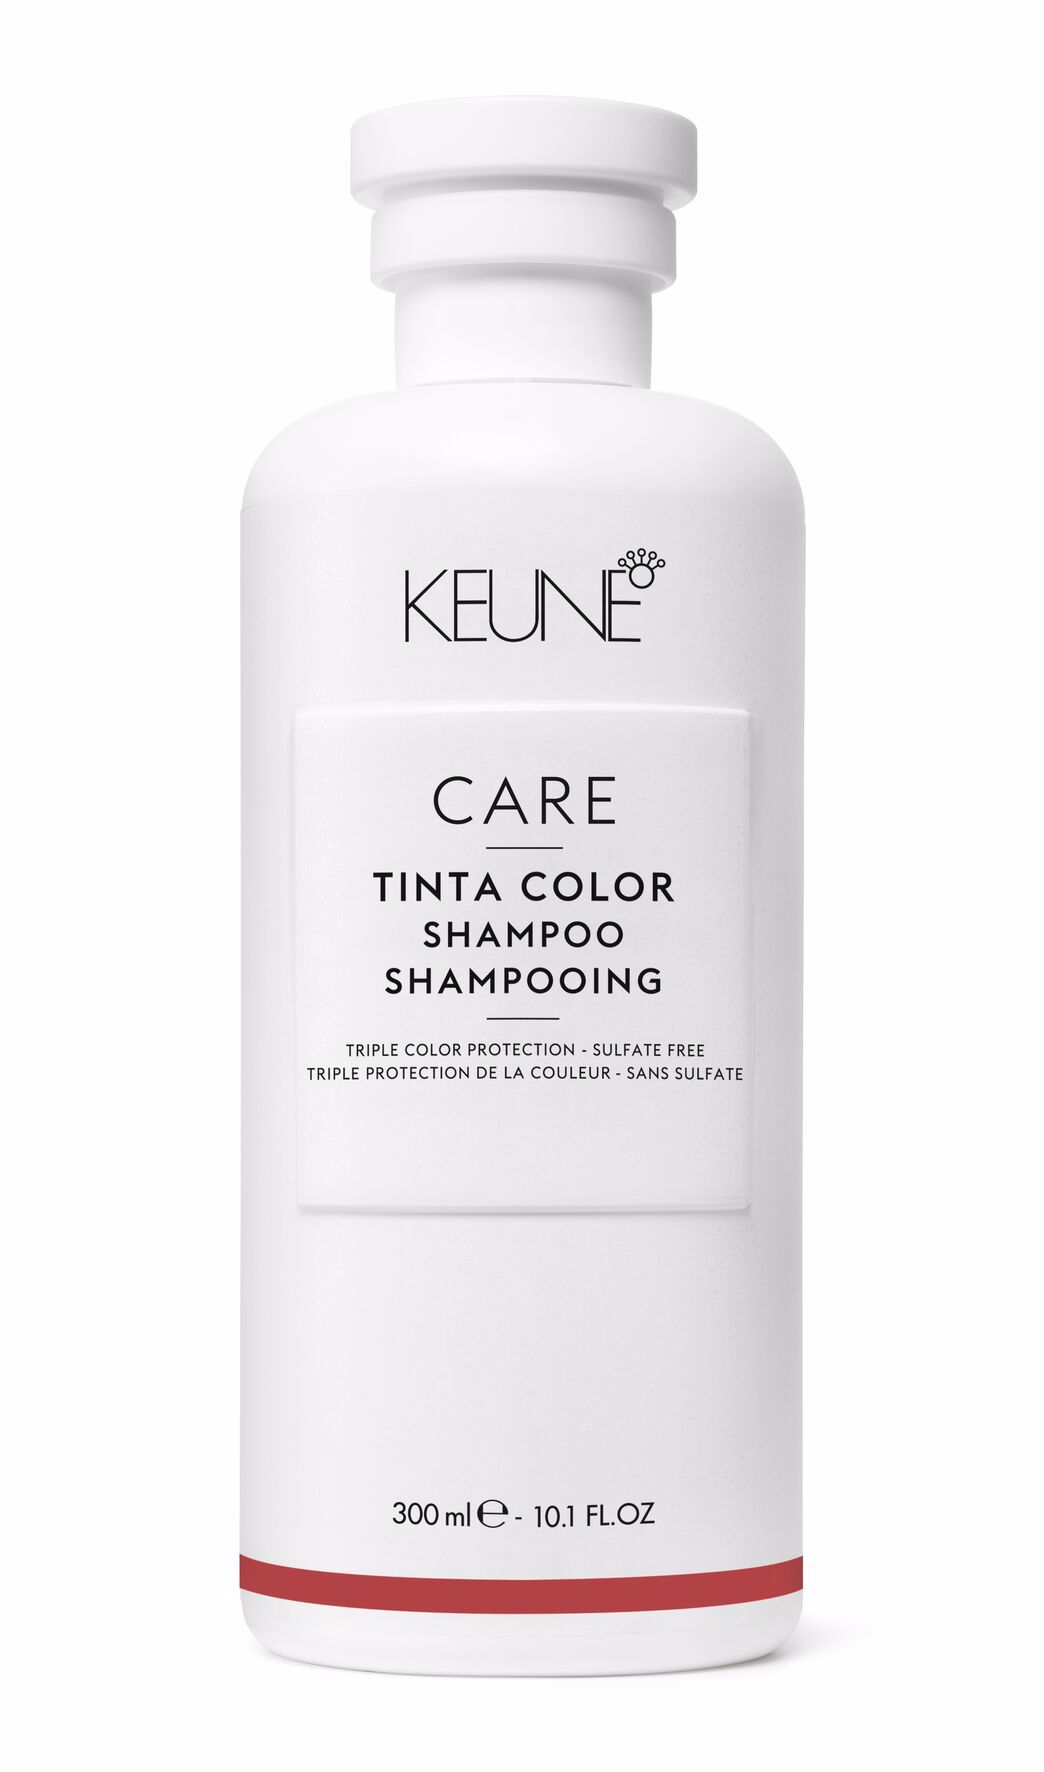 Tinta Color Care Shampoo - Gentle cleansing for colored hair | Anti-Frizz & more volume | Preserves salon-fresh color | Discover professional hair care on keune.ch.